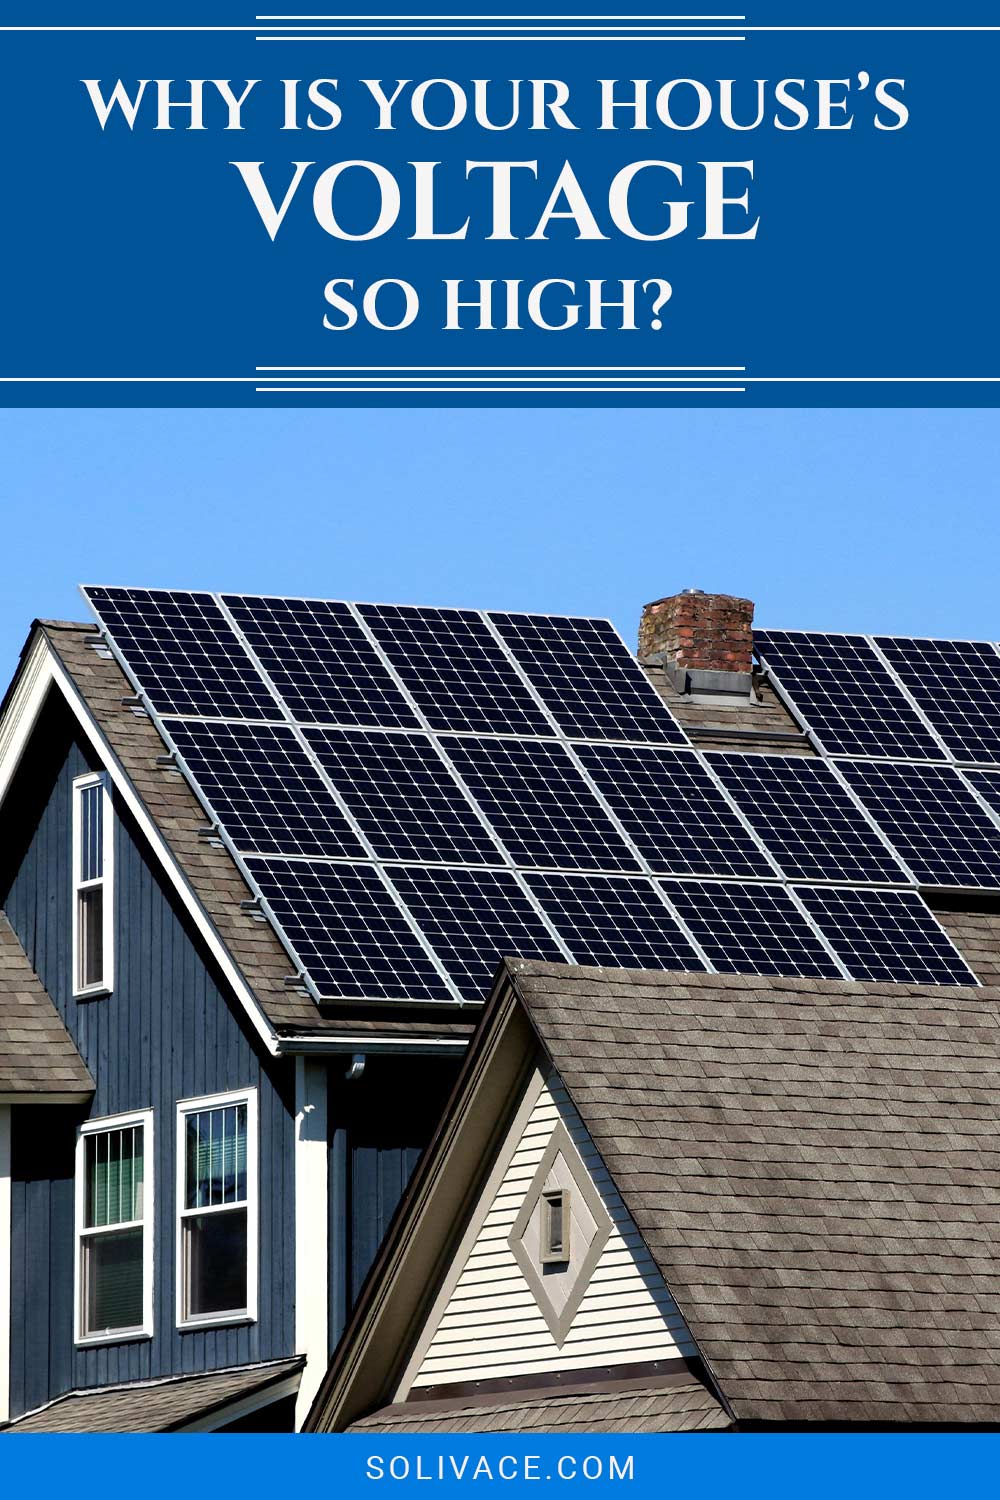 A house with solar panels on its rooftop - Why Is Your House’s Voltage So High?